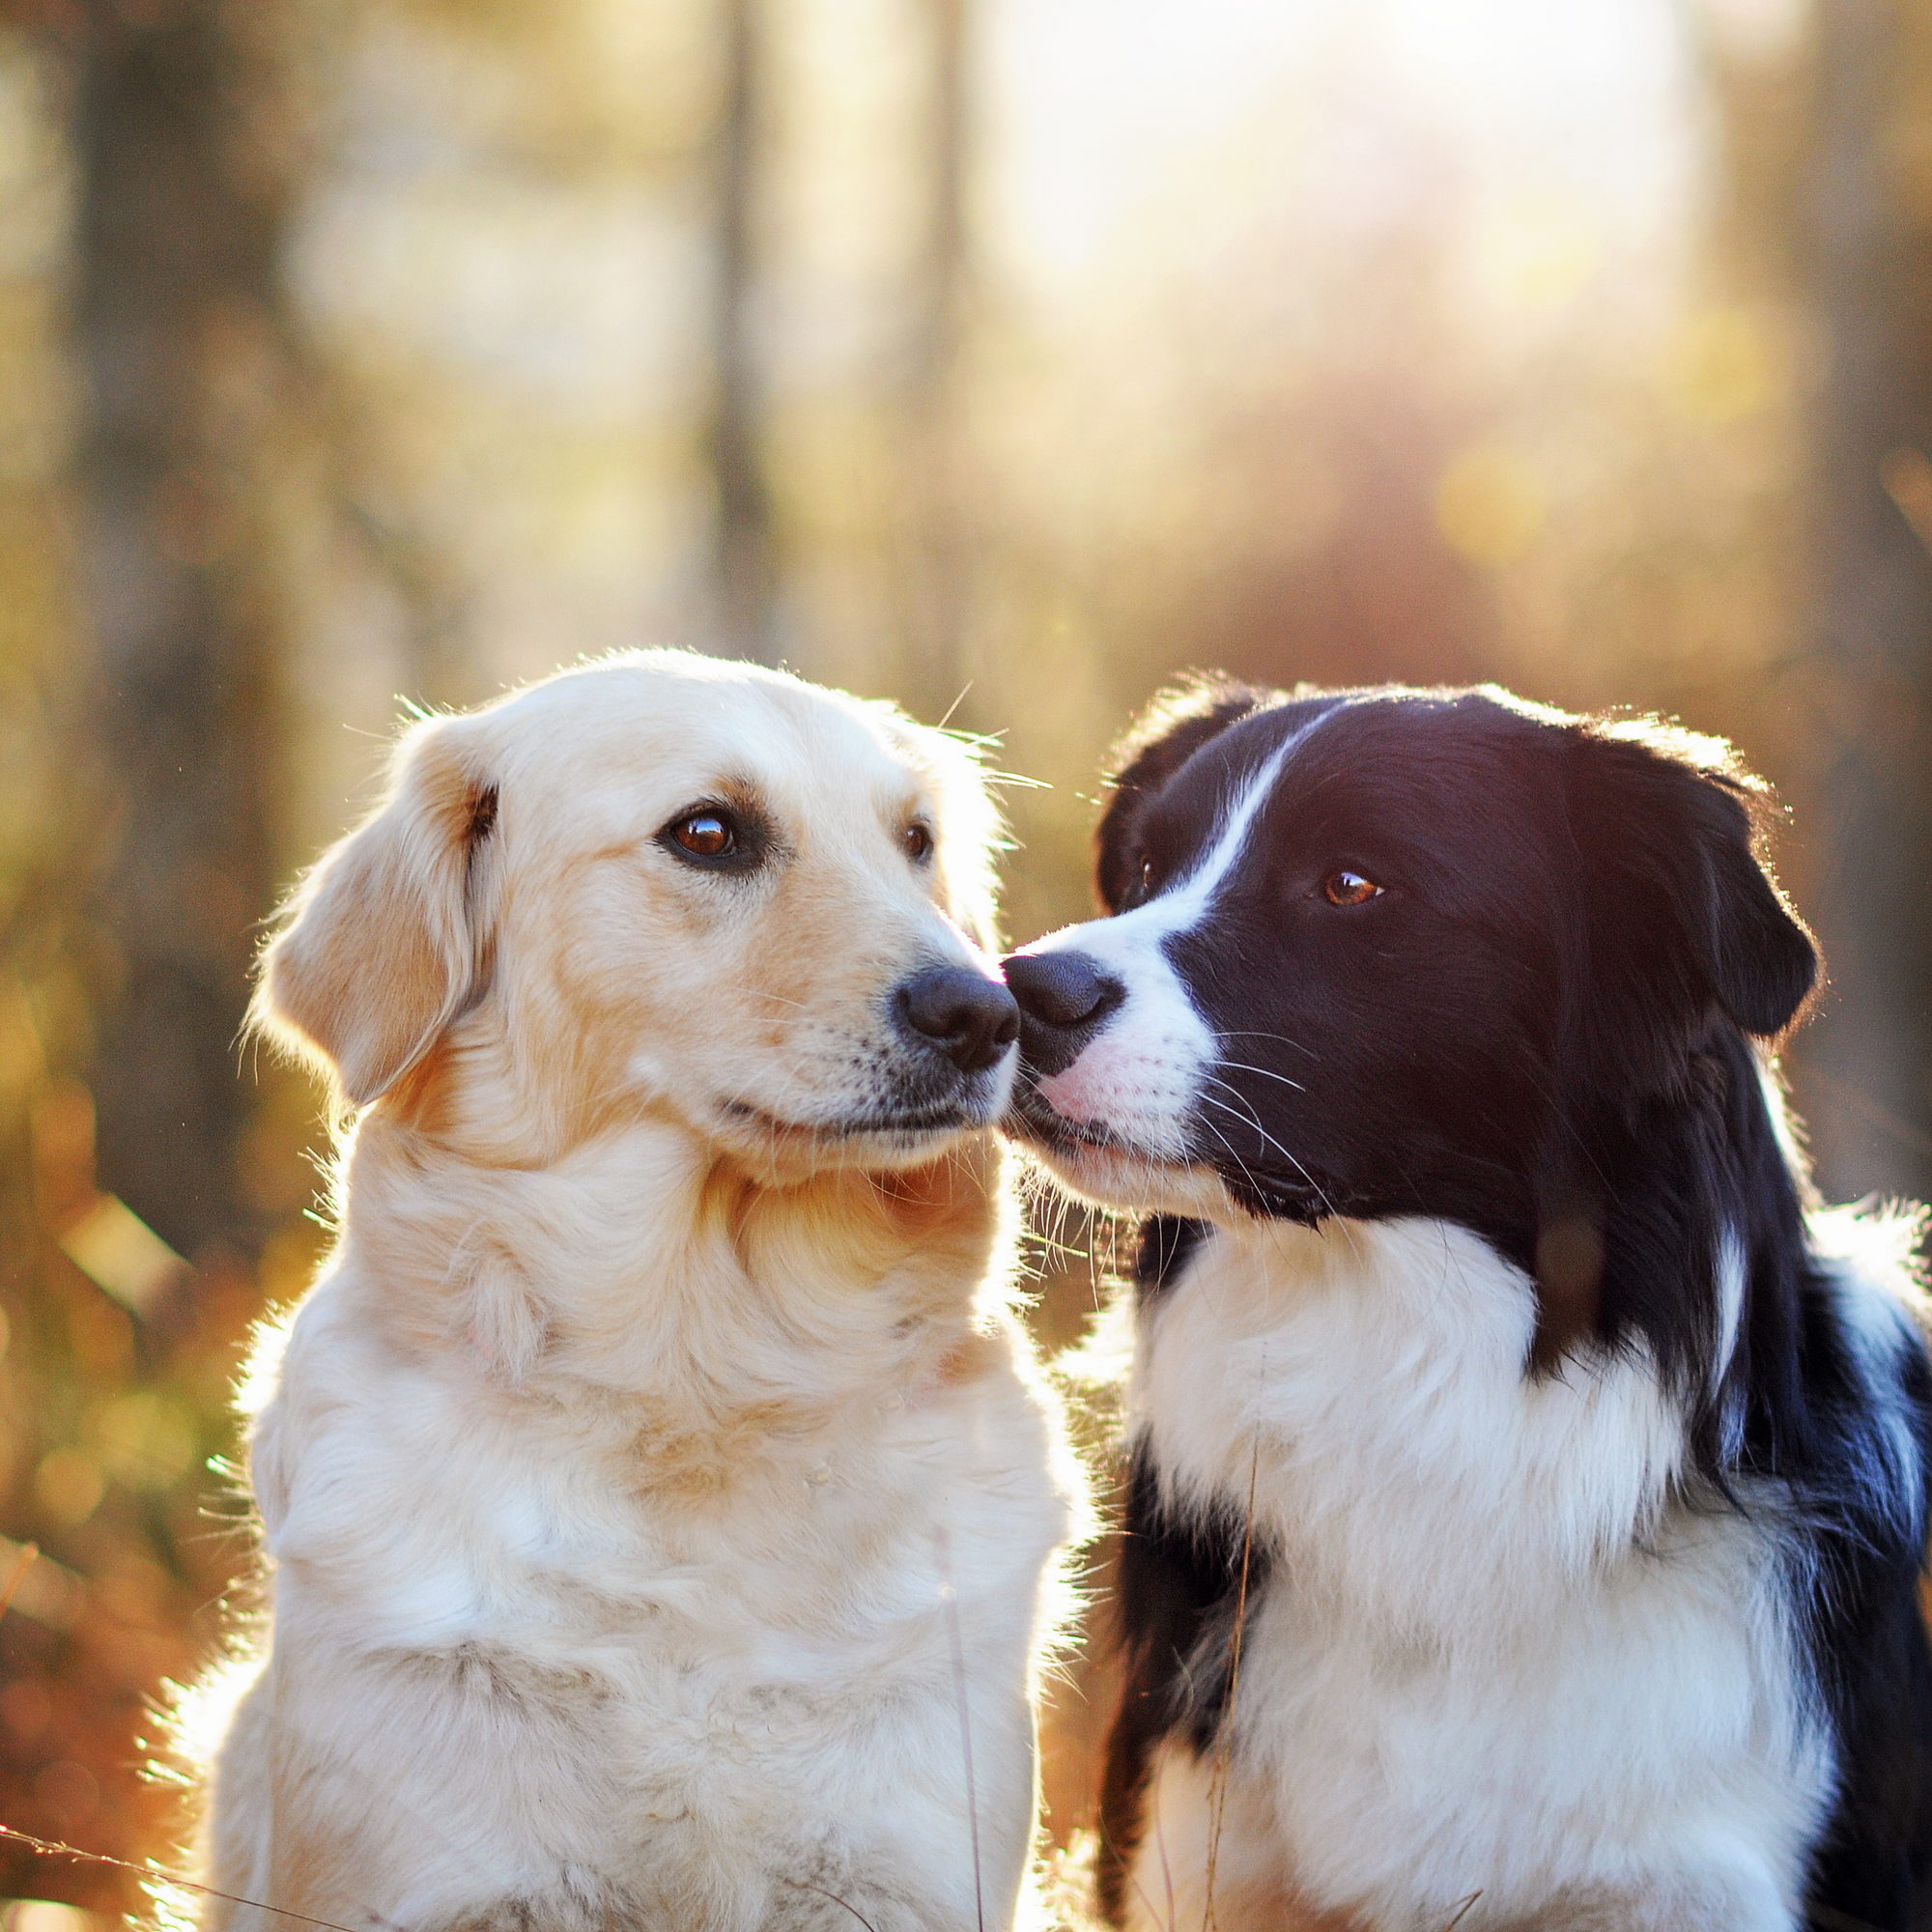 The Role of Socialization in Dog Walking: Meeting Other Dogs Safely